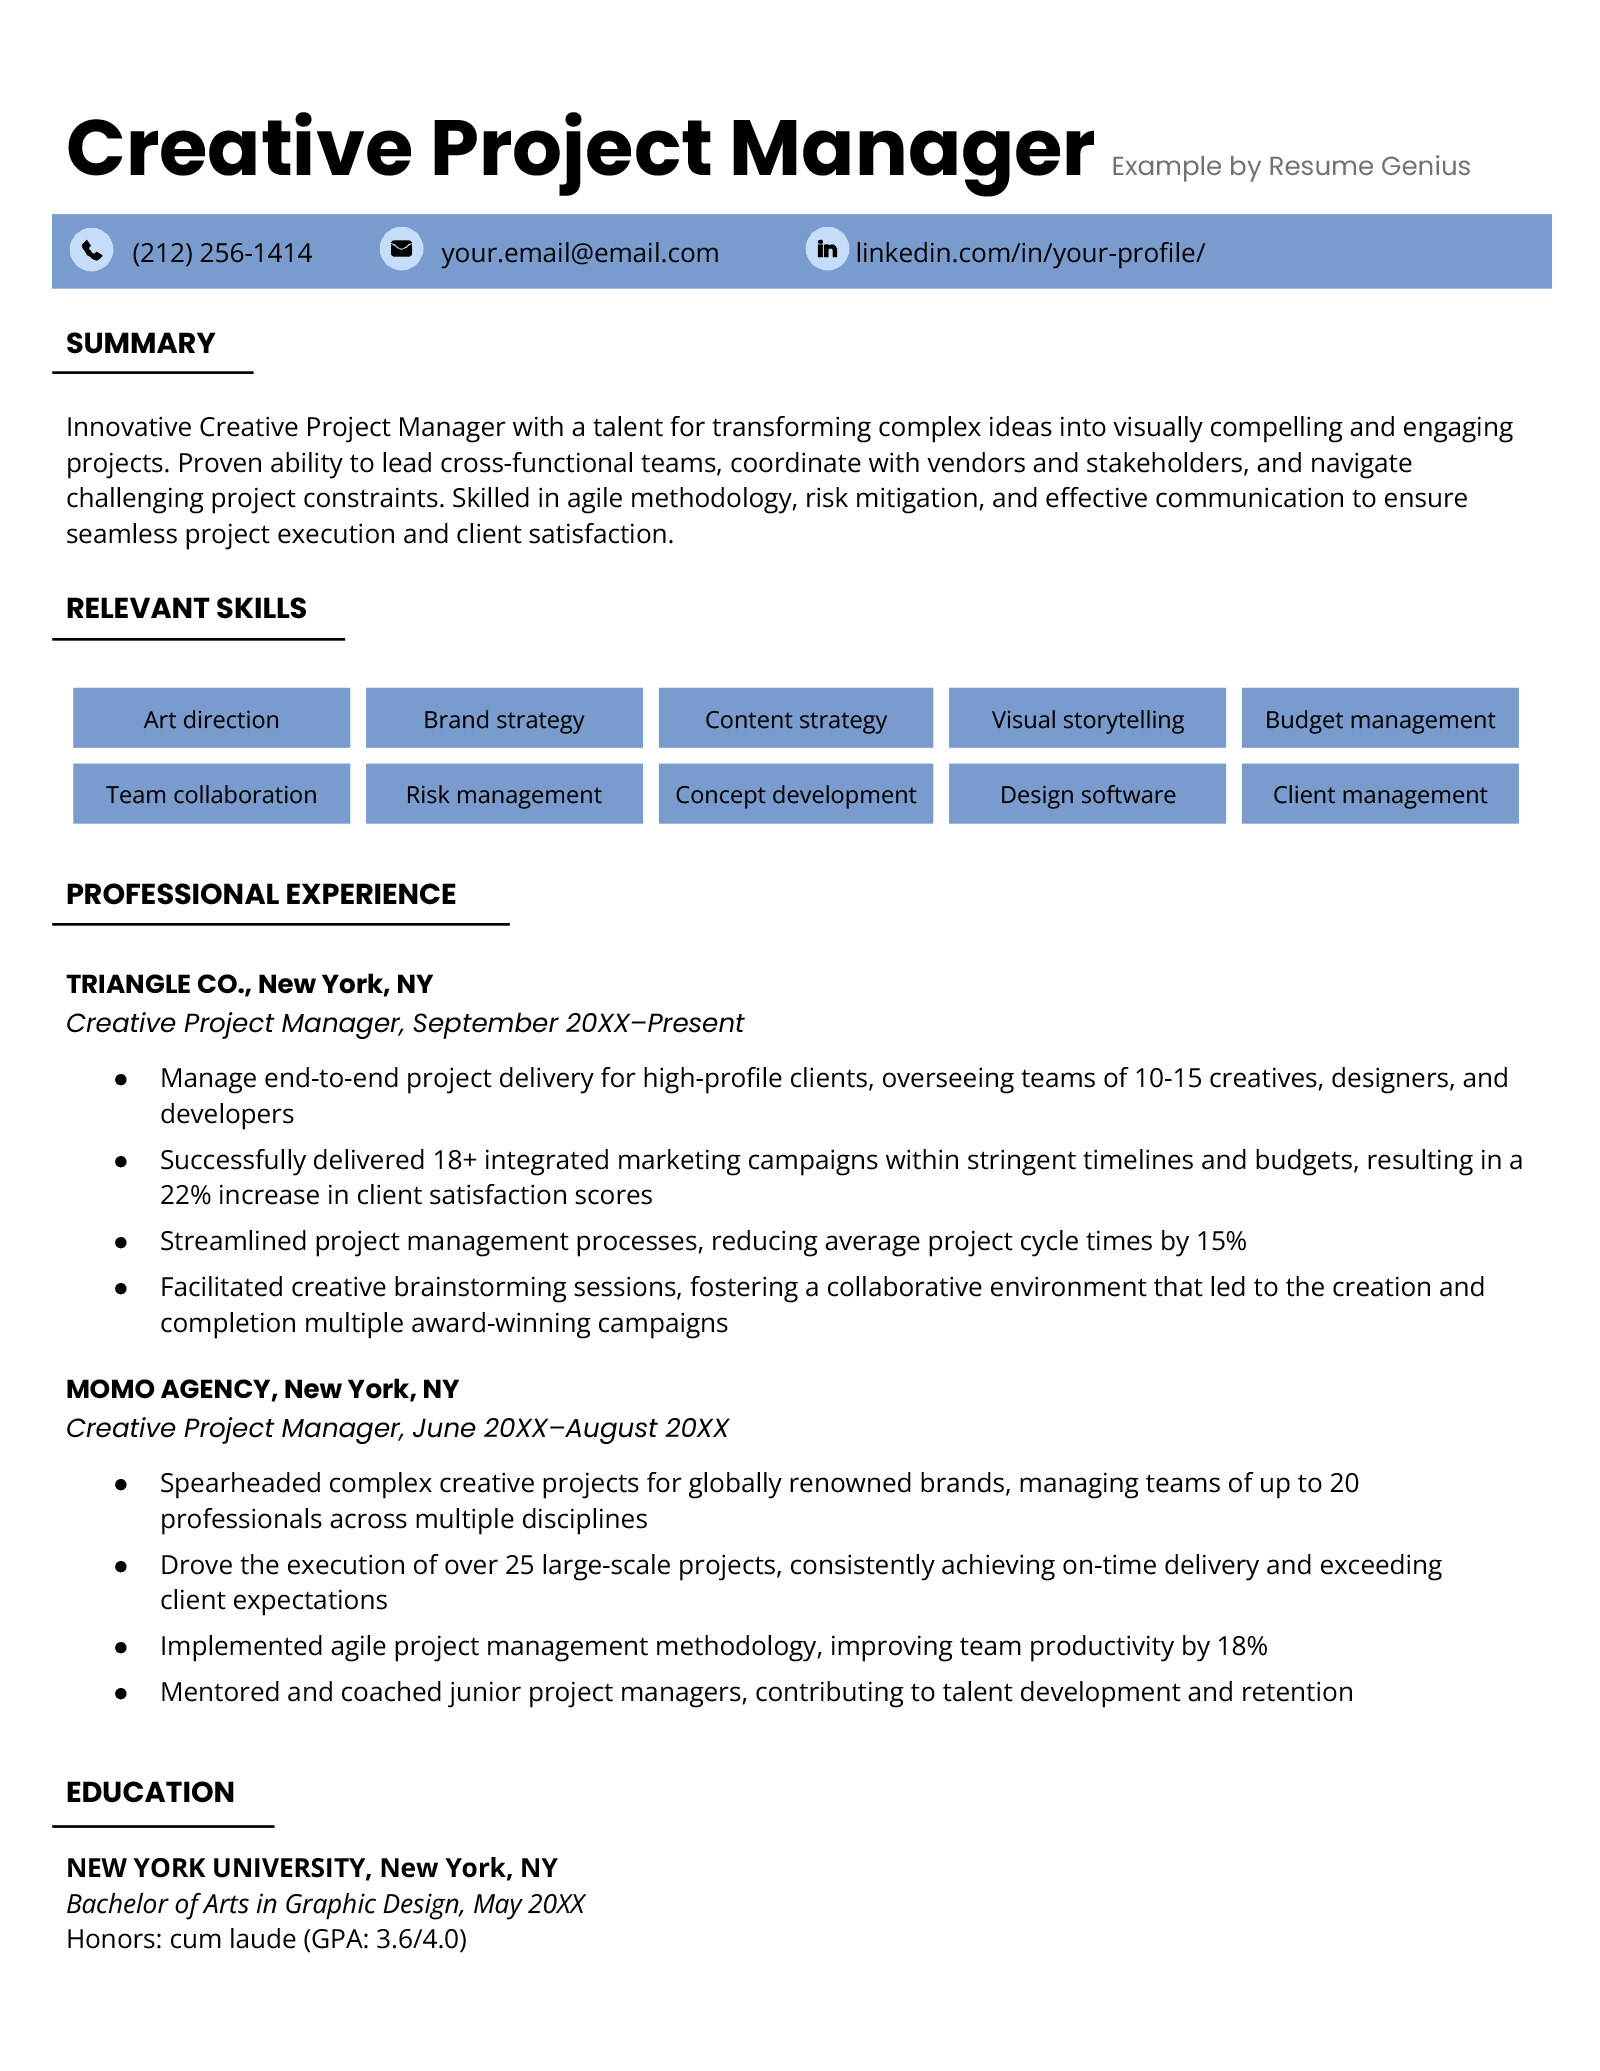 An example resume for a creative project manager.